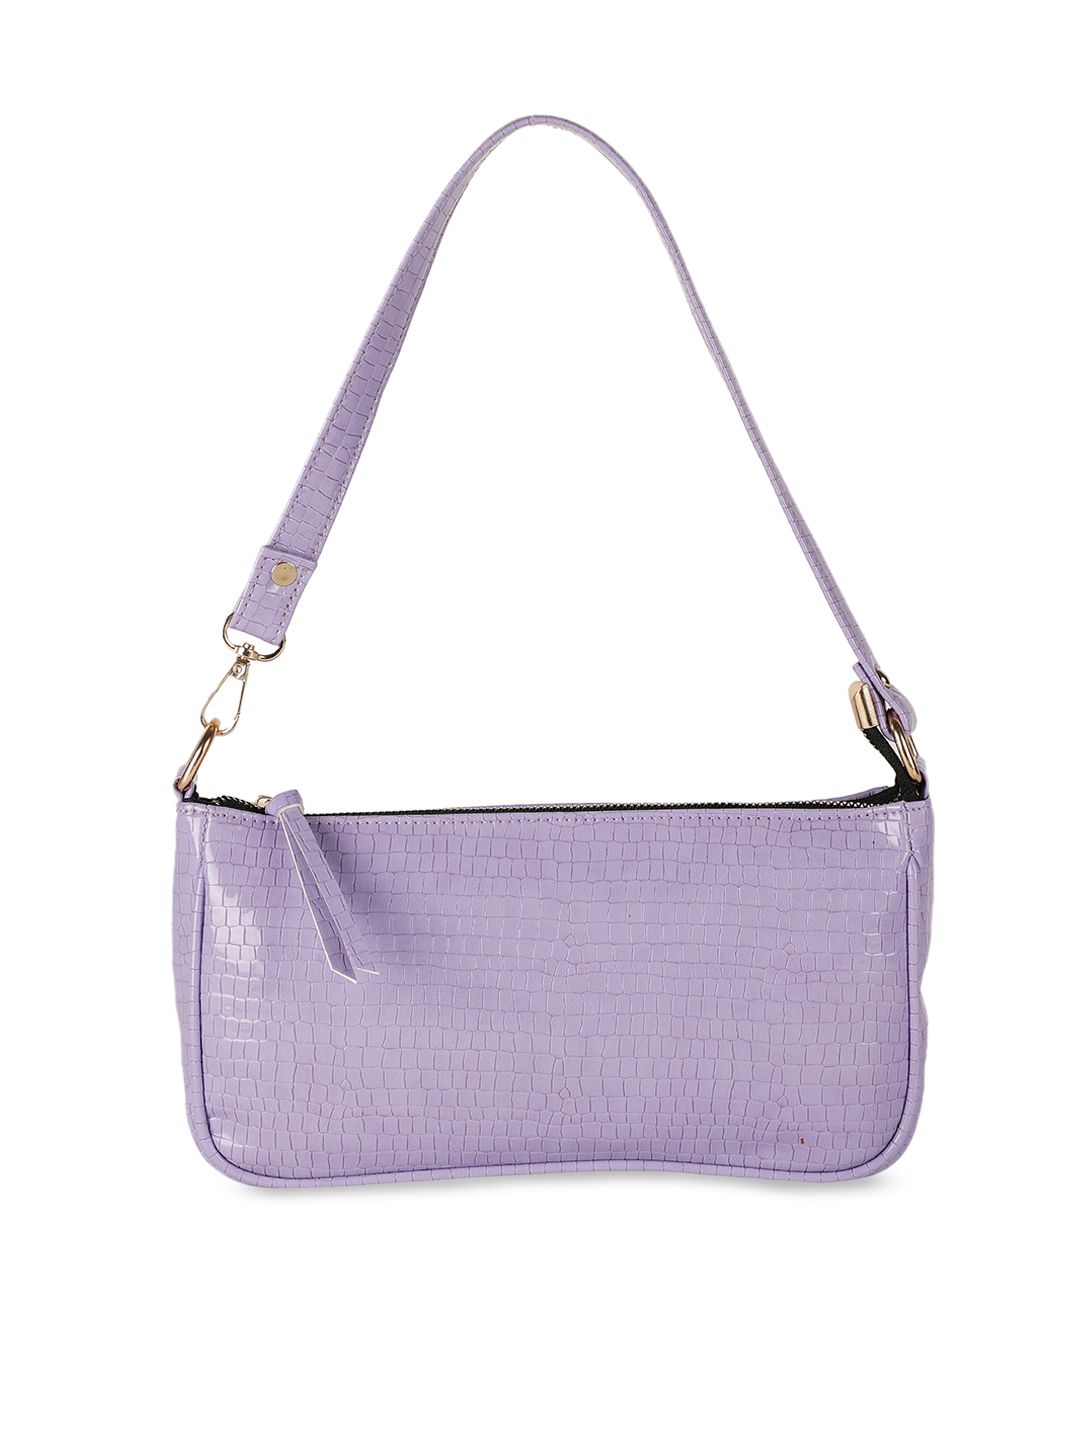 LEKHX Lavender Textured PU Structured Shoulder Bag with Fringed Price in India